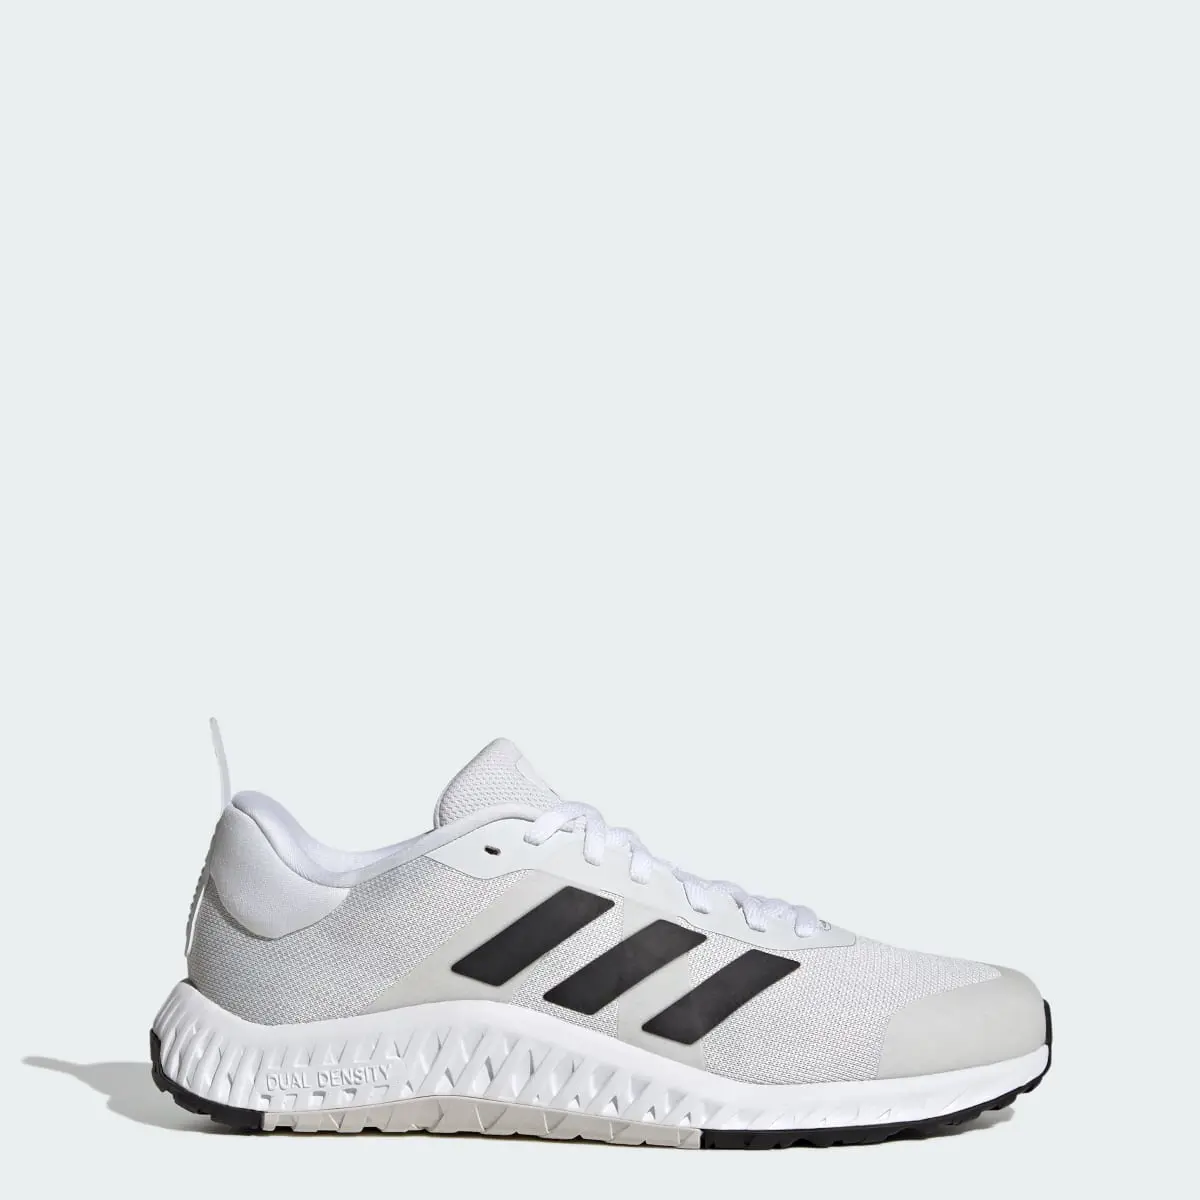 Adidas Everyset Trainer Shoes. 1